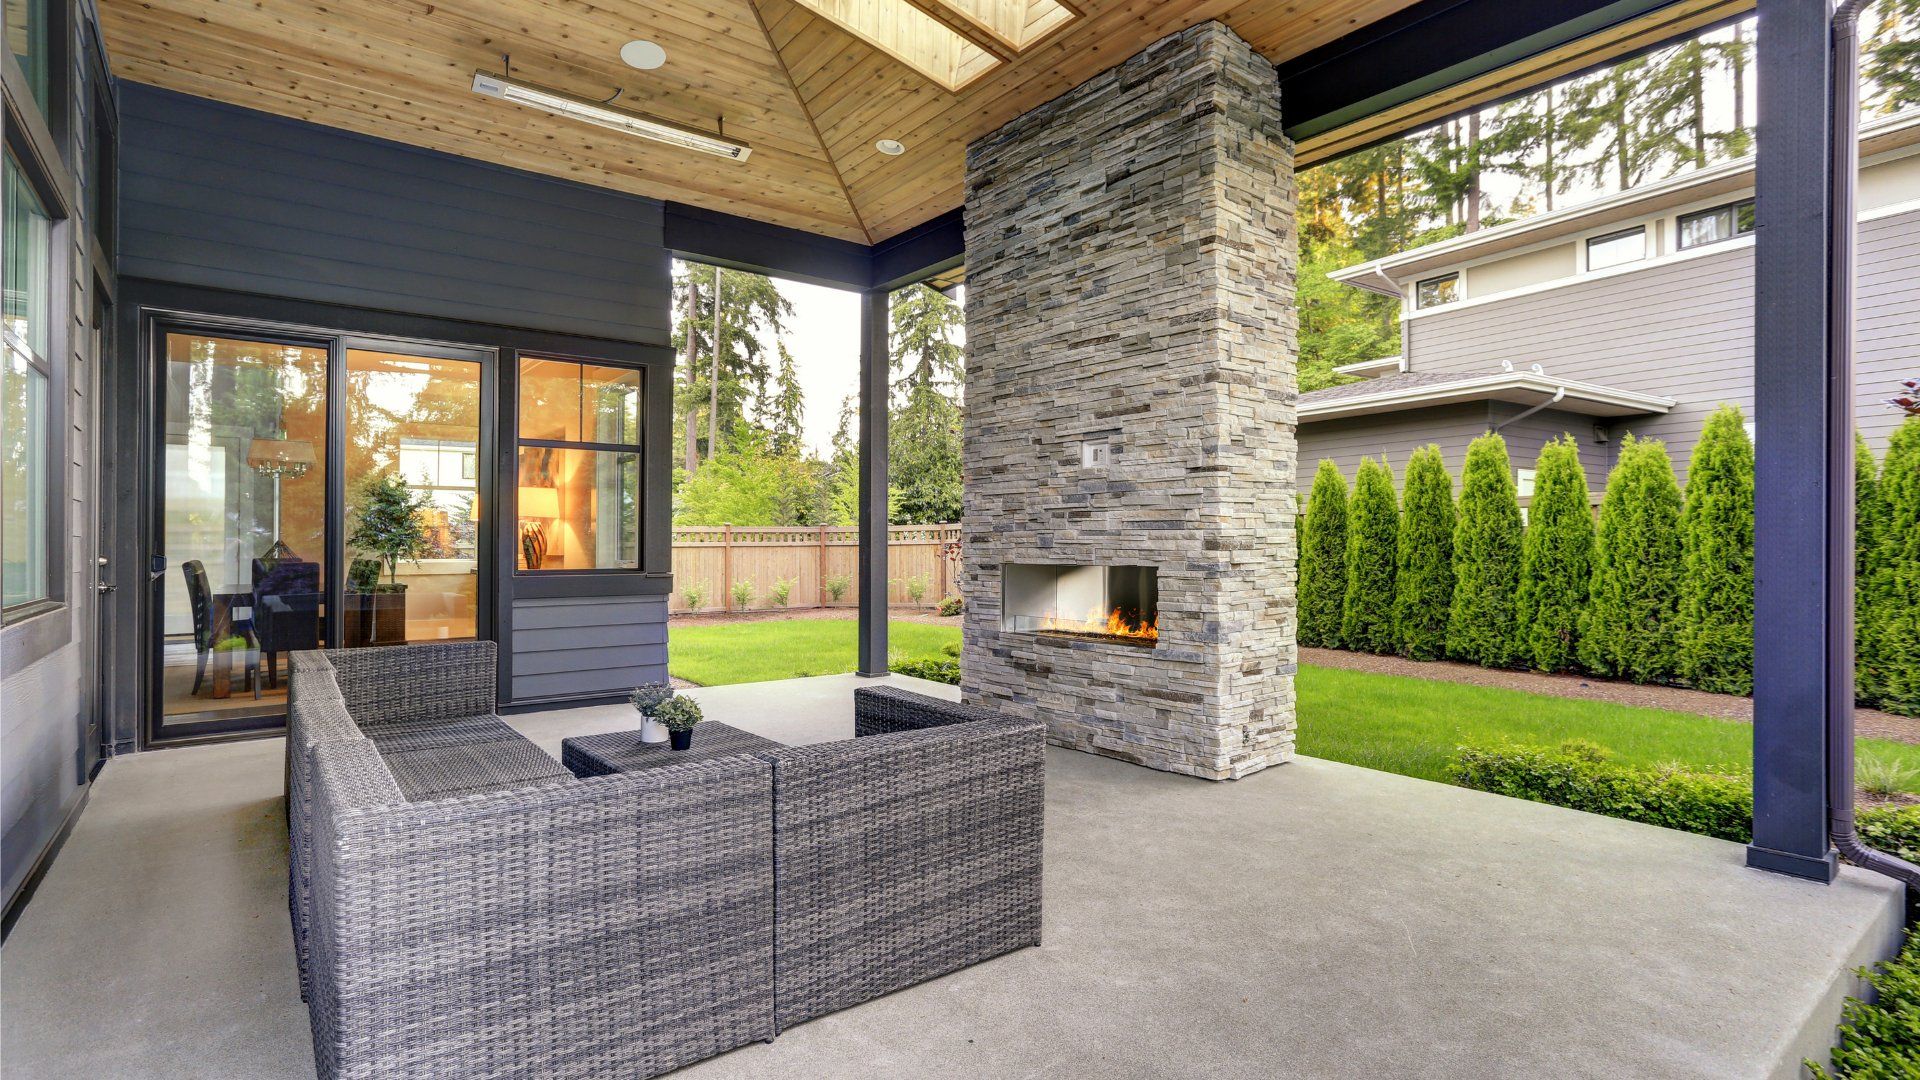 Covered outdoor patio with a brick fireplace and outdoor furniture. The patio is a concrete slab.